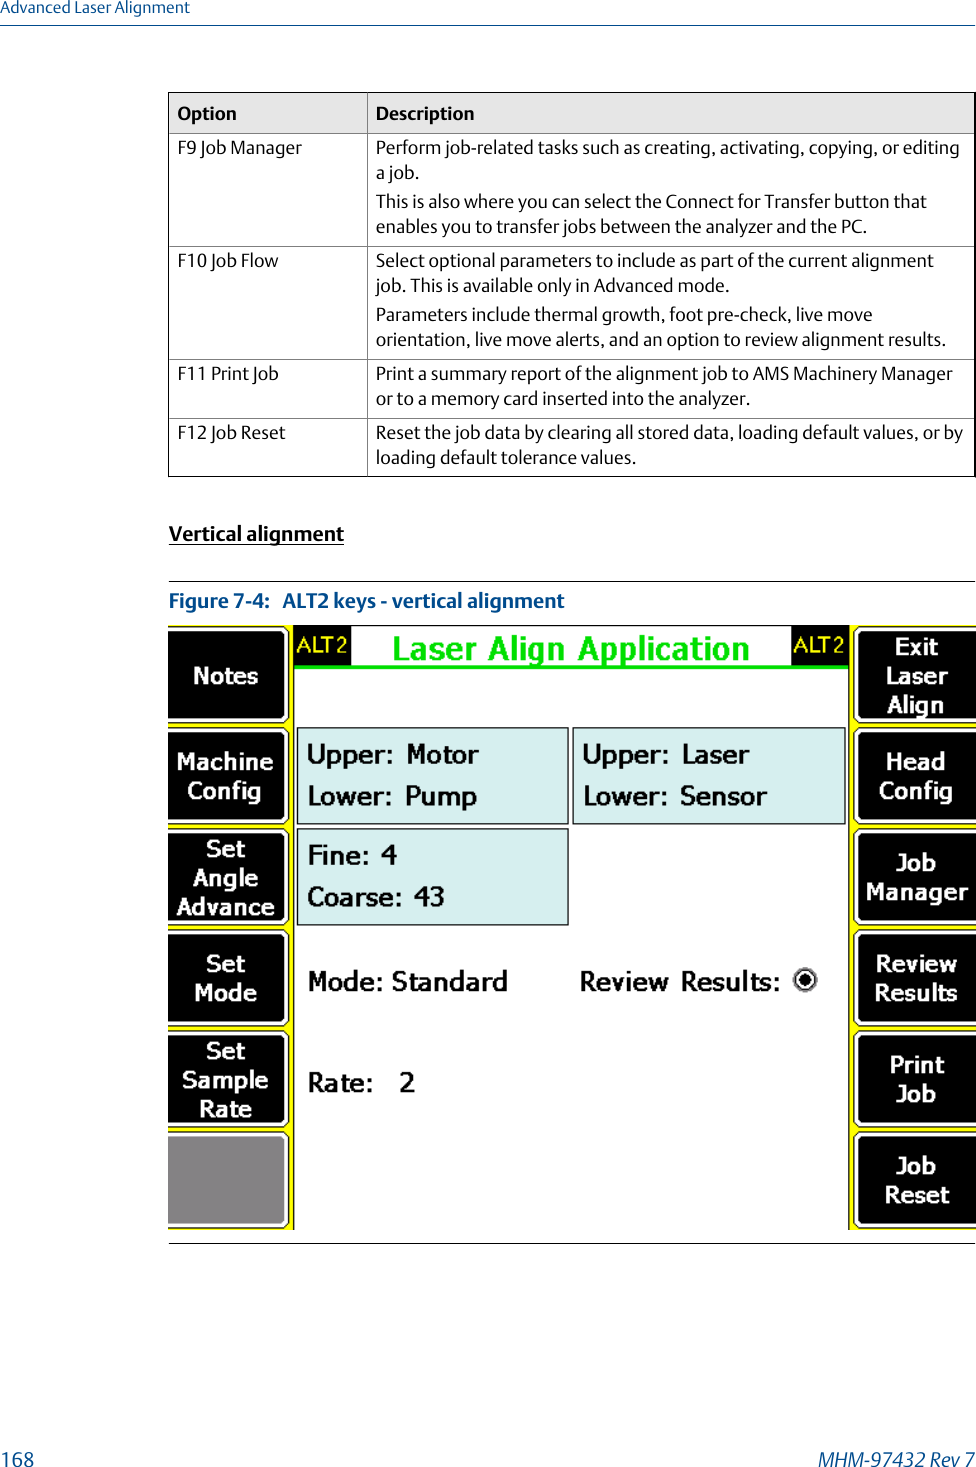 Option DescriptionF9 Job Manager Perform job-related tasks such as creating, activating, copying, or editinga job.This is also where you can select the Connect for Transfer button thatenables you to transfer jobs between the analyzer and the PC.F10 Job Flow Select optional parameters to include as part of the current alignmentjob. This is available only in Advanced mode.Parameters include thermal growth, foot pre-check, live moveorientation, live move alerts, and an option to review alignment results.F11 Print Job Print a summary report of the alignment job to AMS Machinery Manageror to a memory card inserted into the analyzer.F12 Job Reset Reset the job data by clearing all stored data, loading default values, or byloading default tolerance values.Vertical alignmentALT2 keys - vertical alignmentFigure 7-4:   Advanced Laser Alignment168 MHM-97432 Rev 7